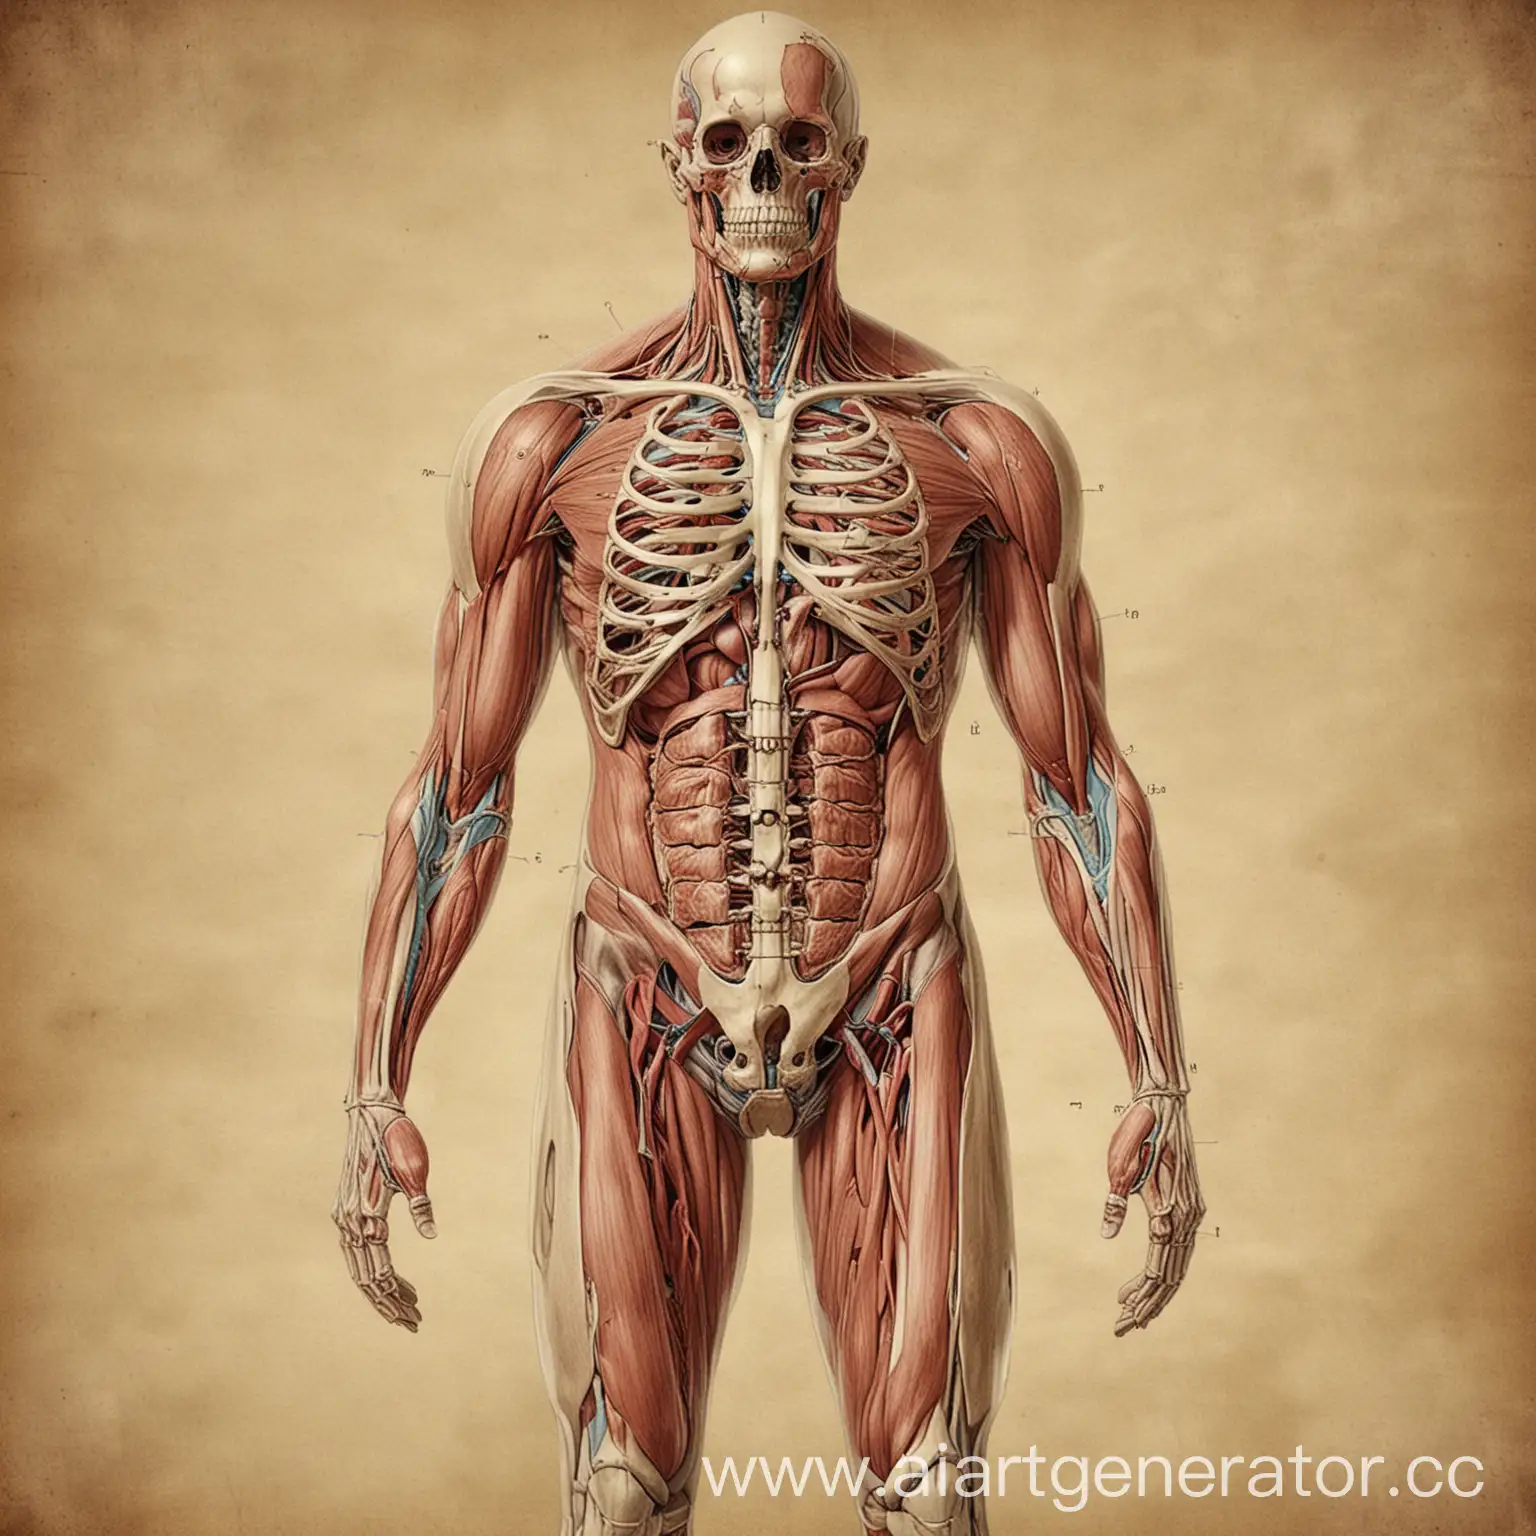 Detailed-Human-Anatomy-Illustration-Muscular-System-and-Internal-Organs